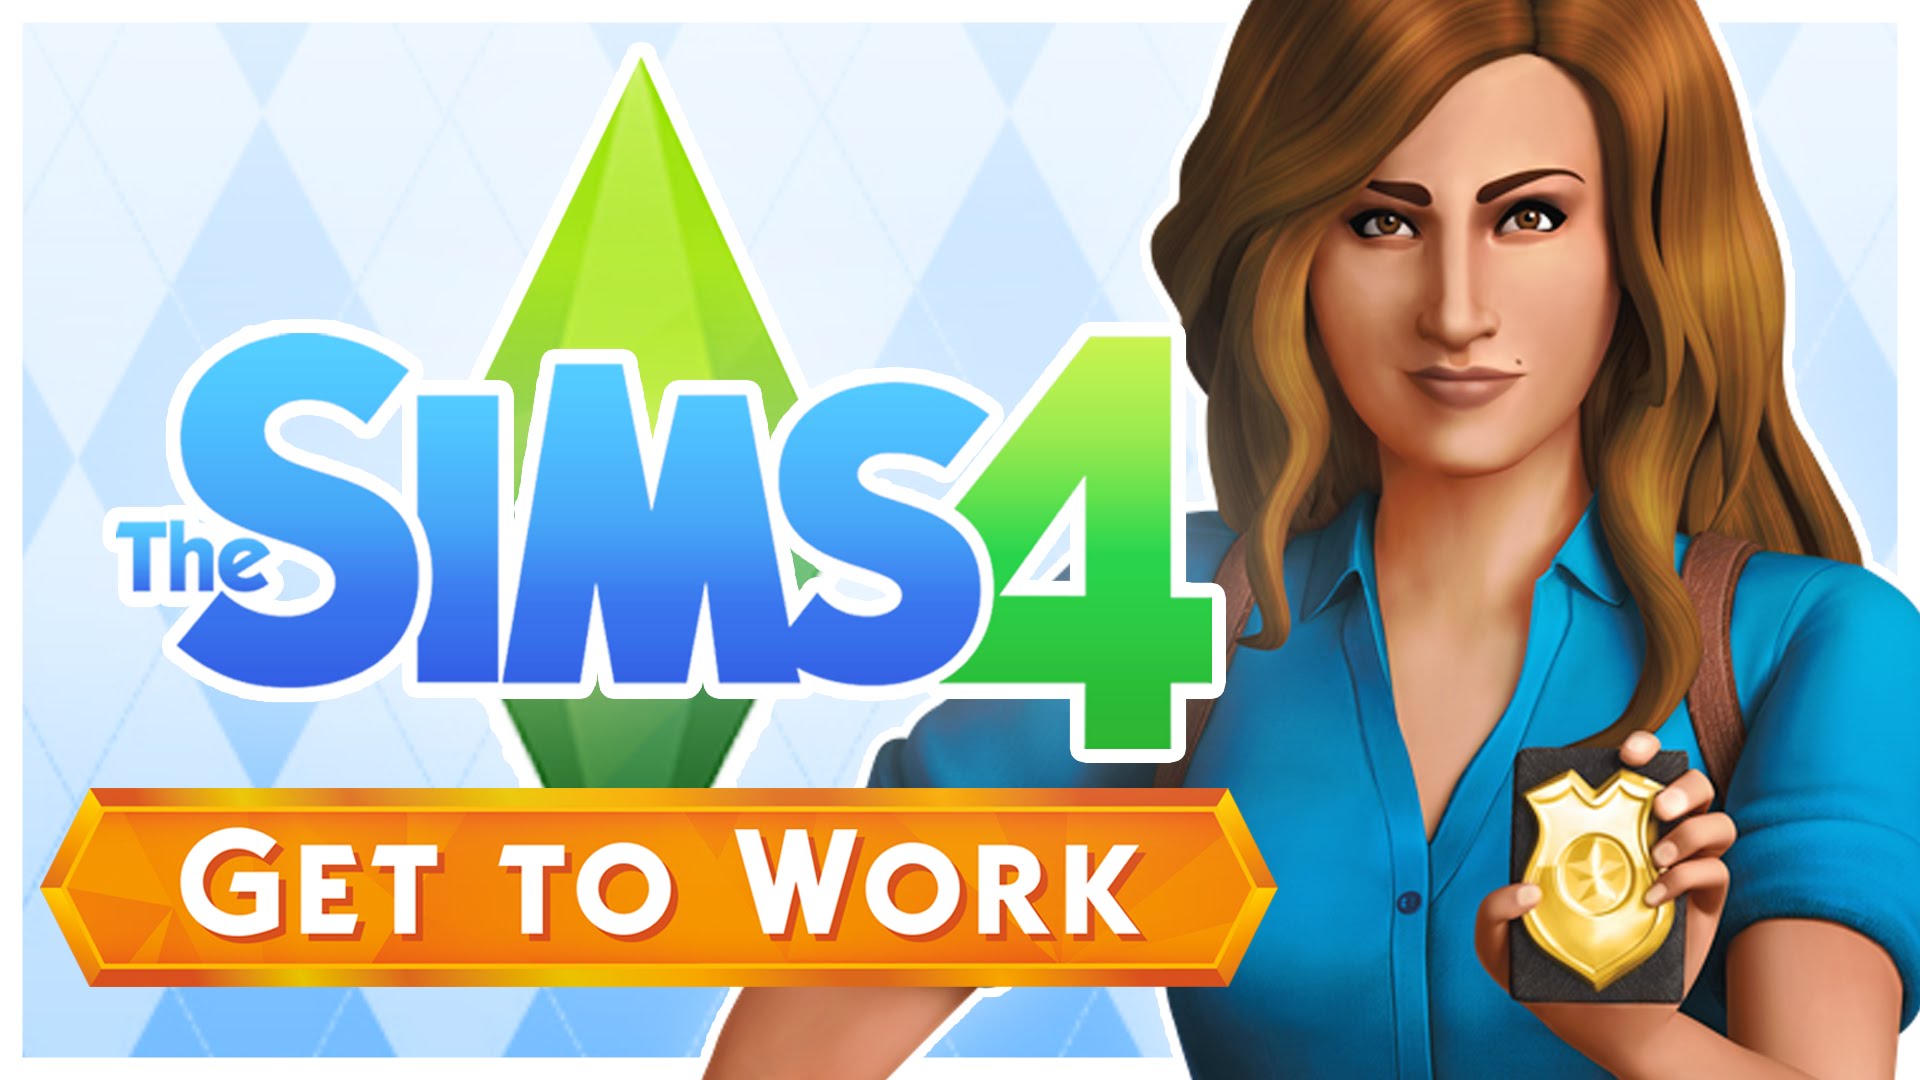 The Sims 4 Get to Work cover